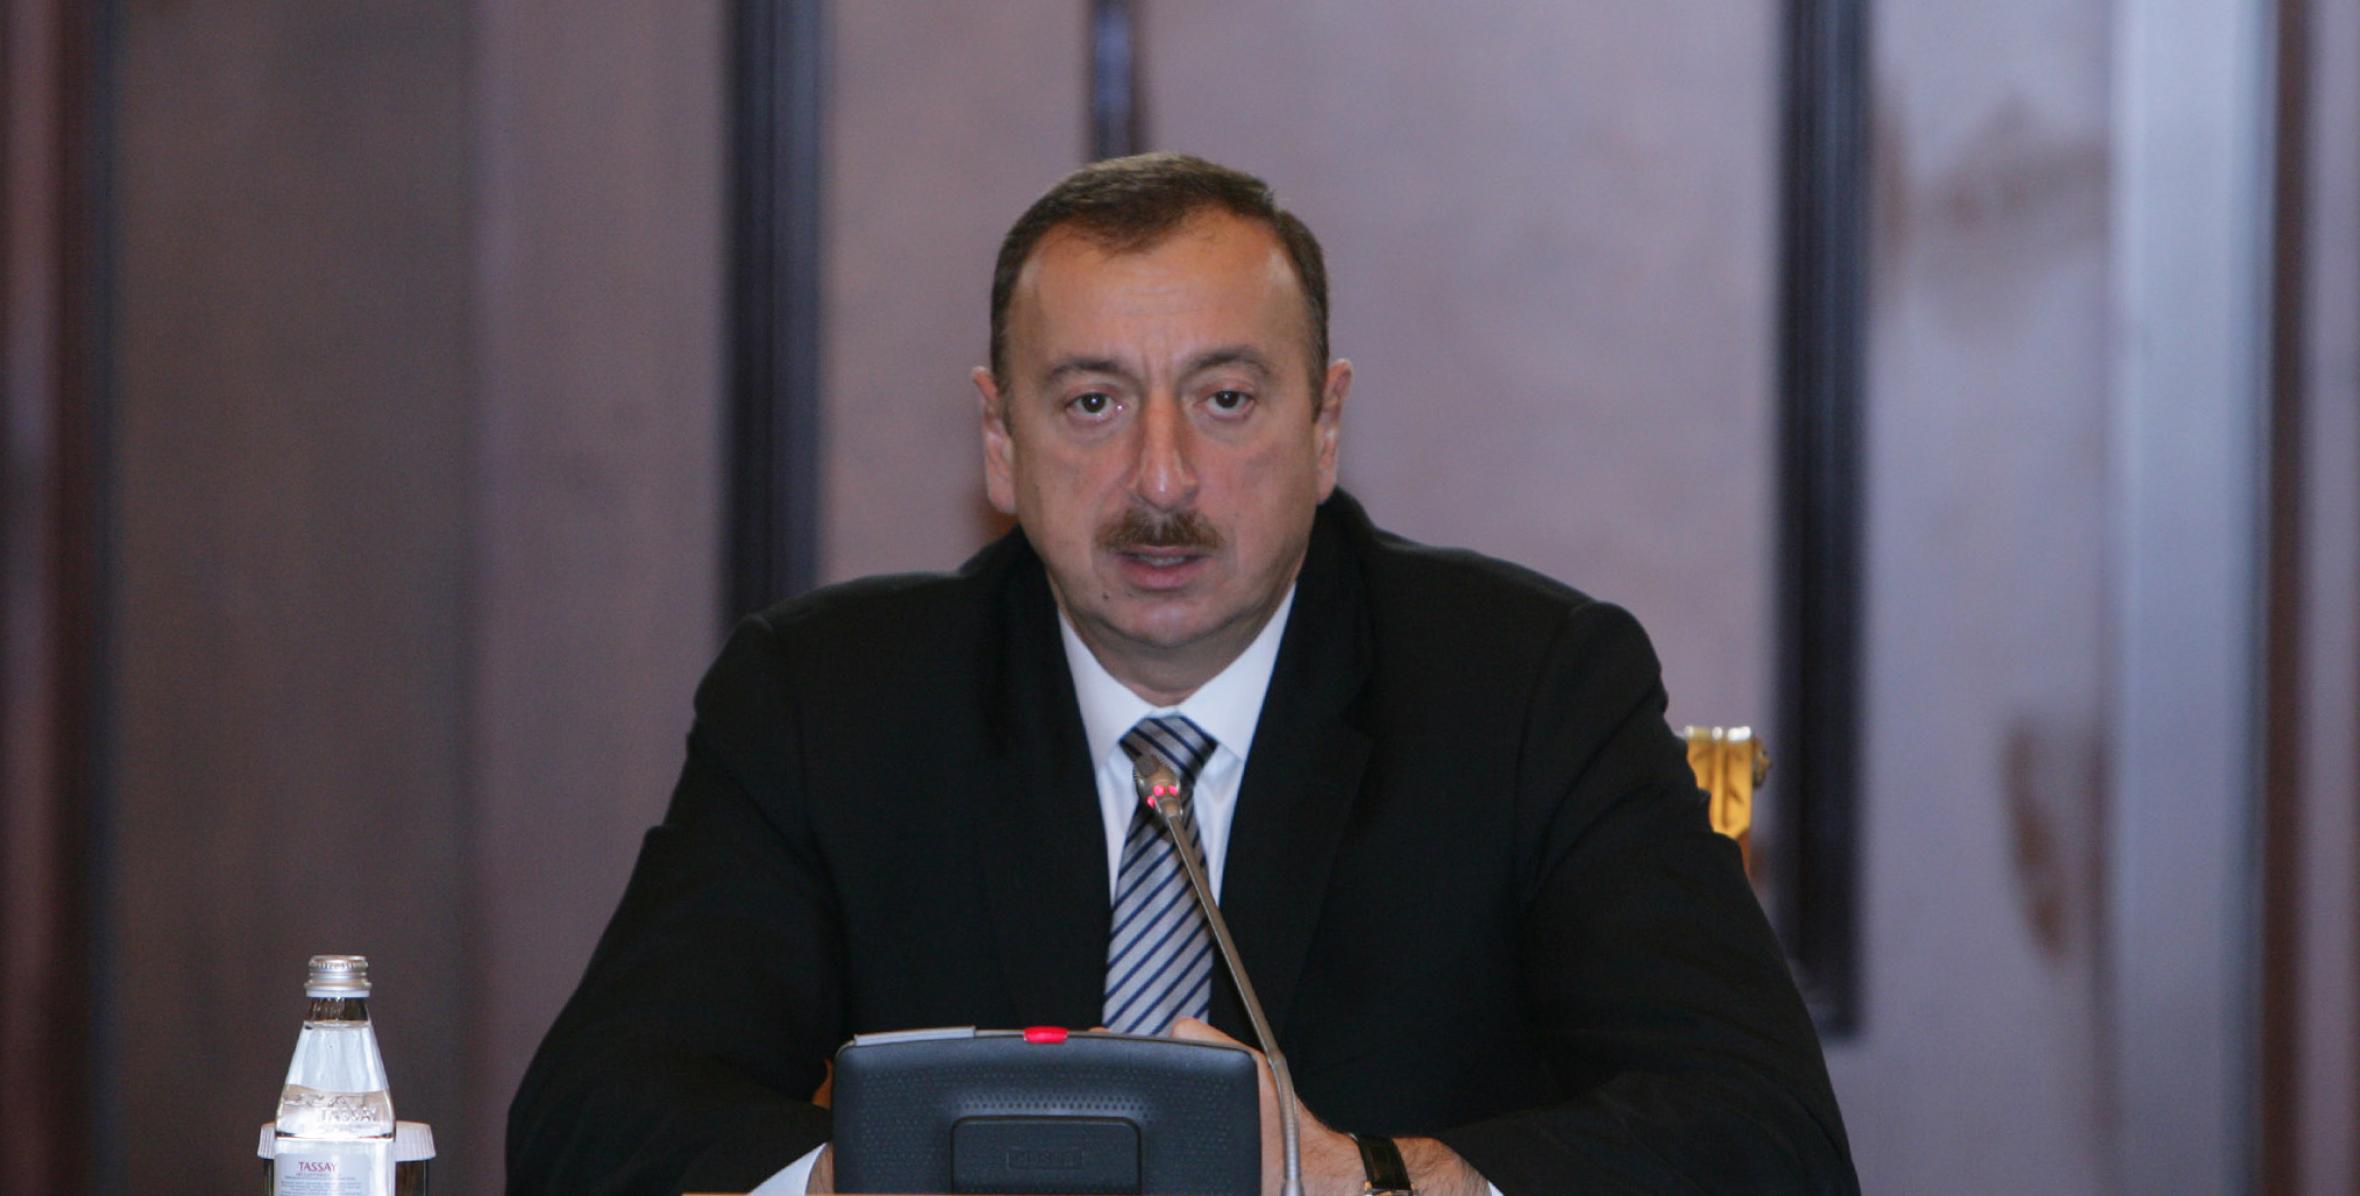 Speech by Ilham Aliyev at the First Summit of the Cooperation Council of Turkic Speaking States